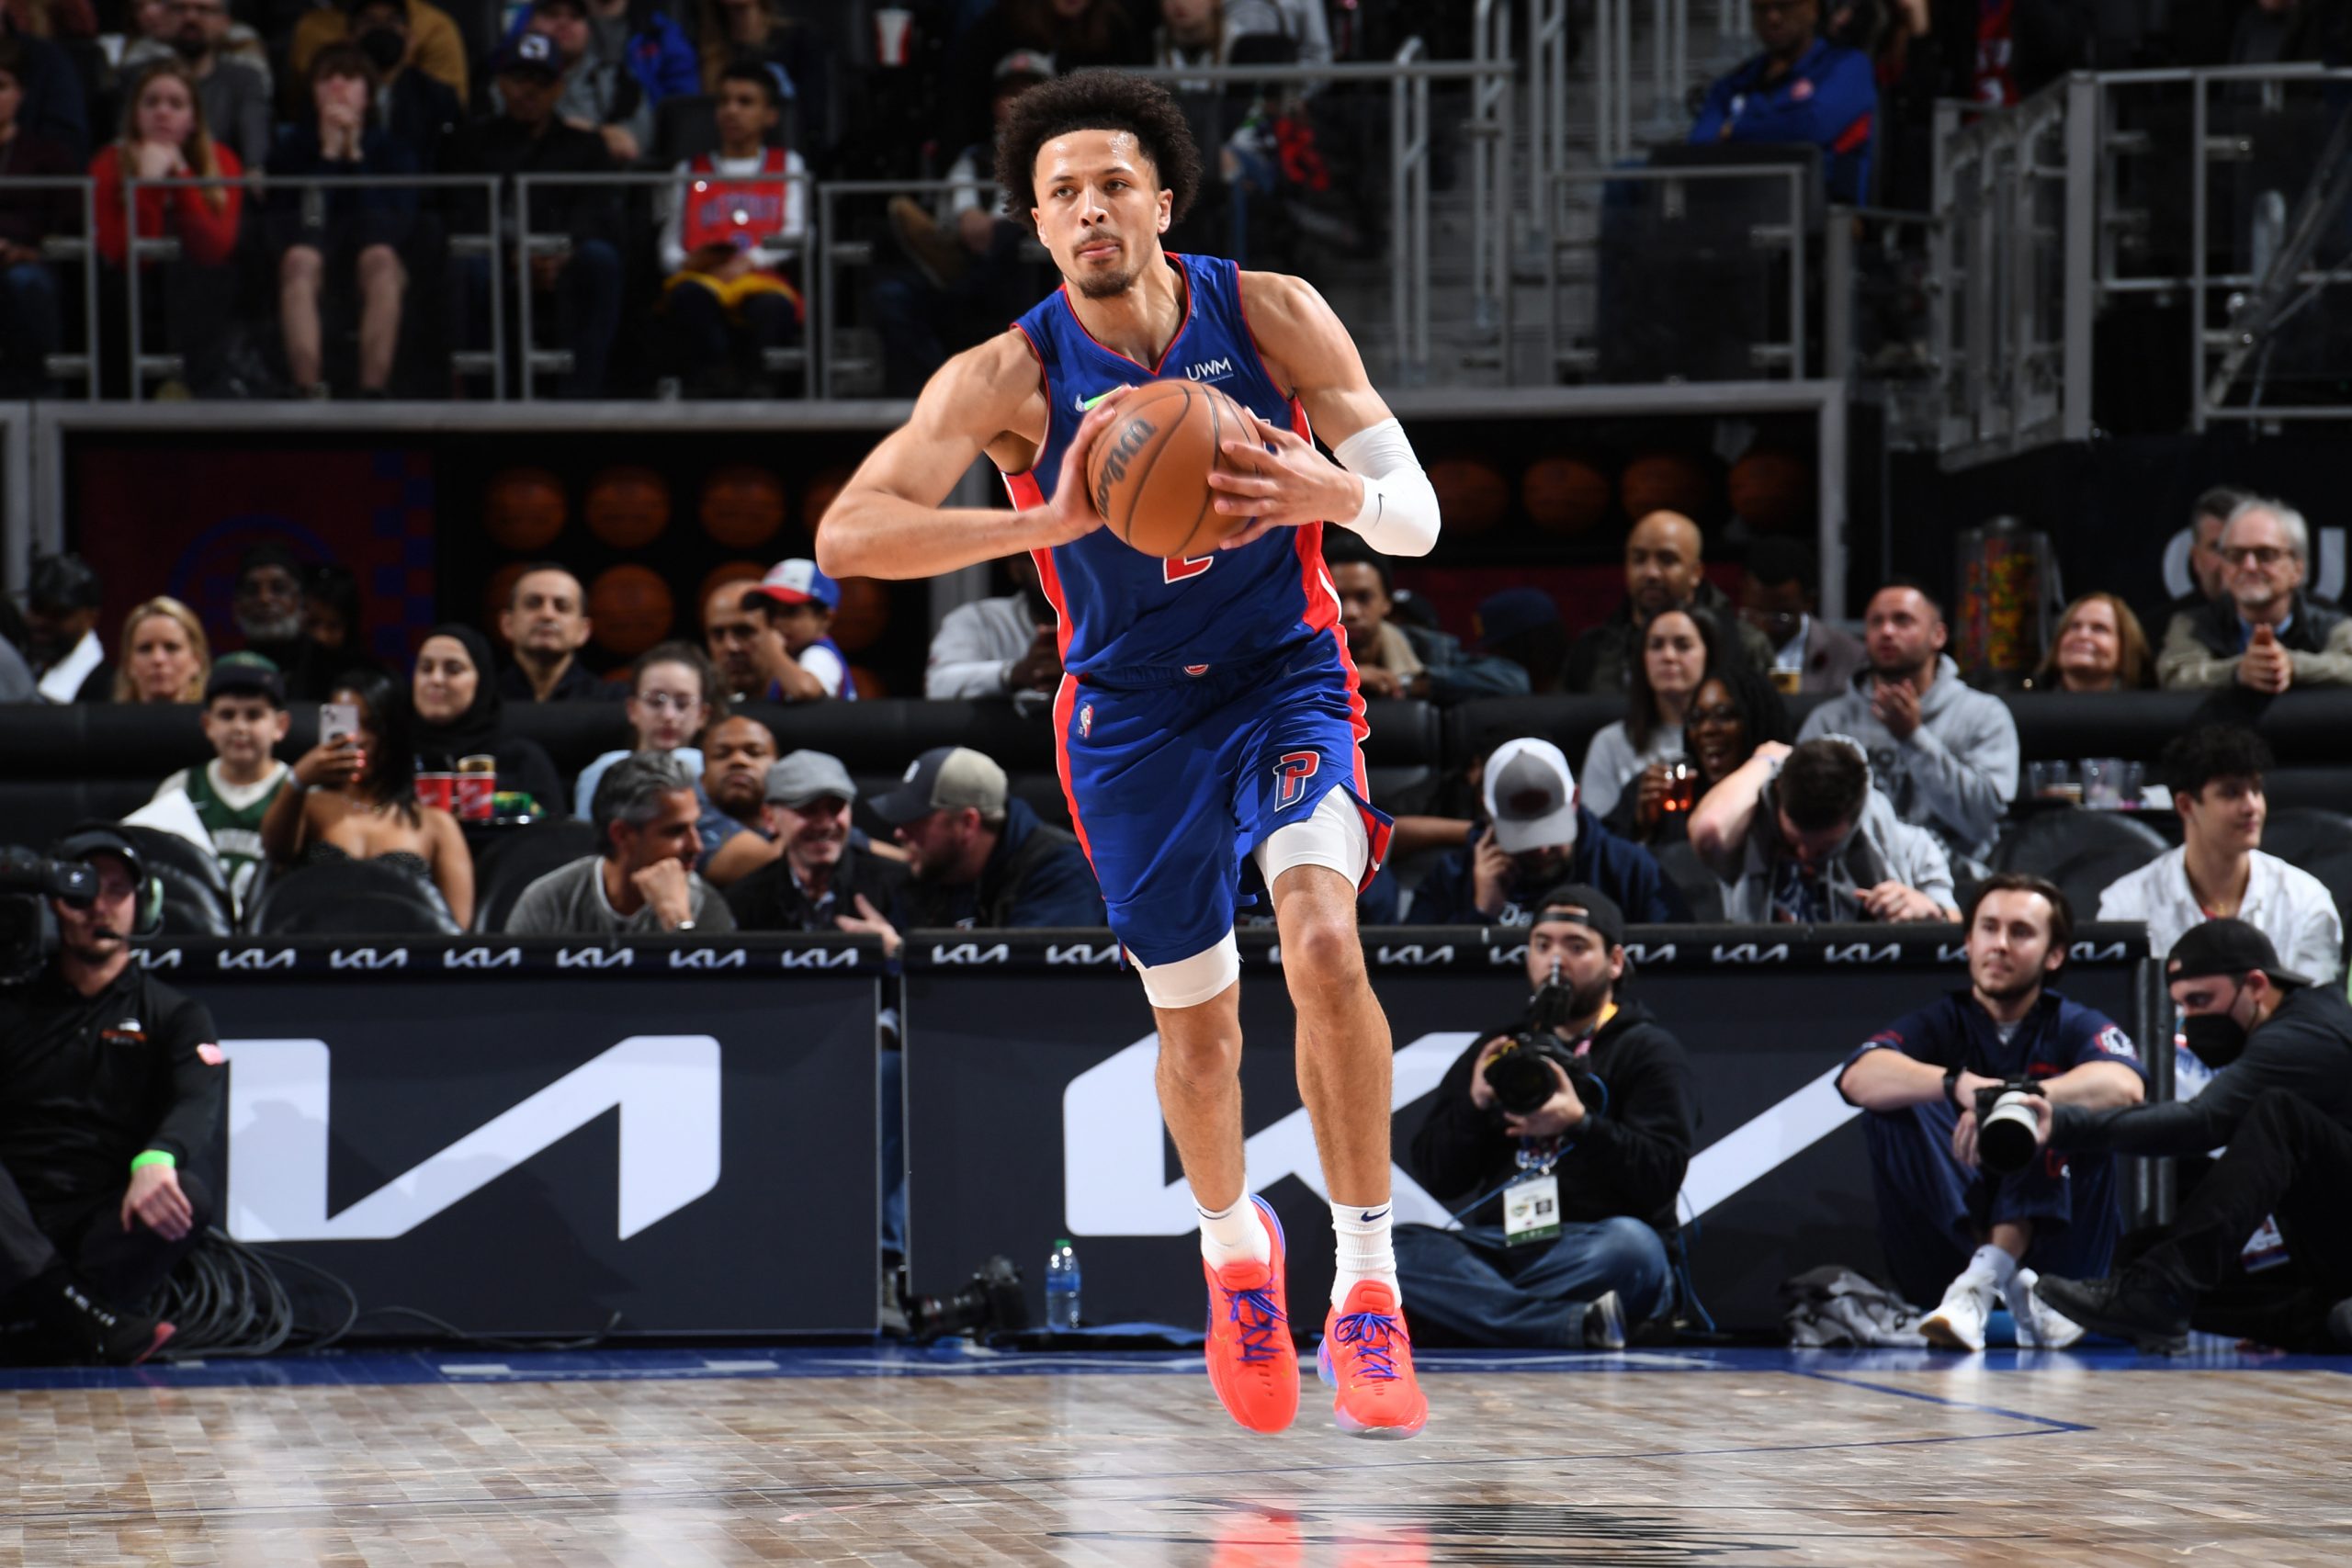 Cade Cunningham is closer to rookie Luka Doncic than you might think